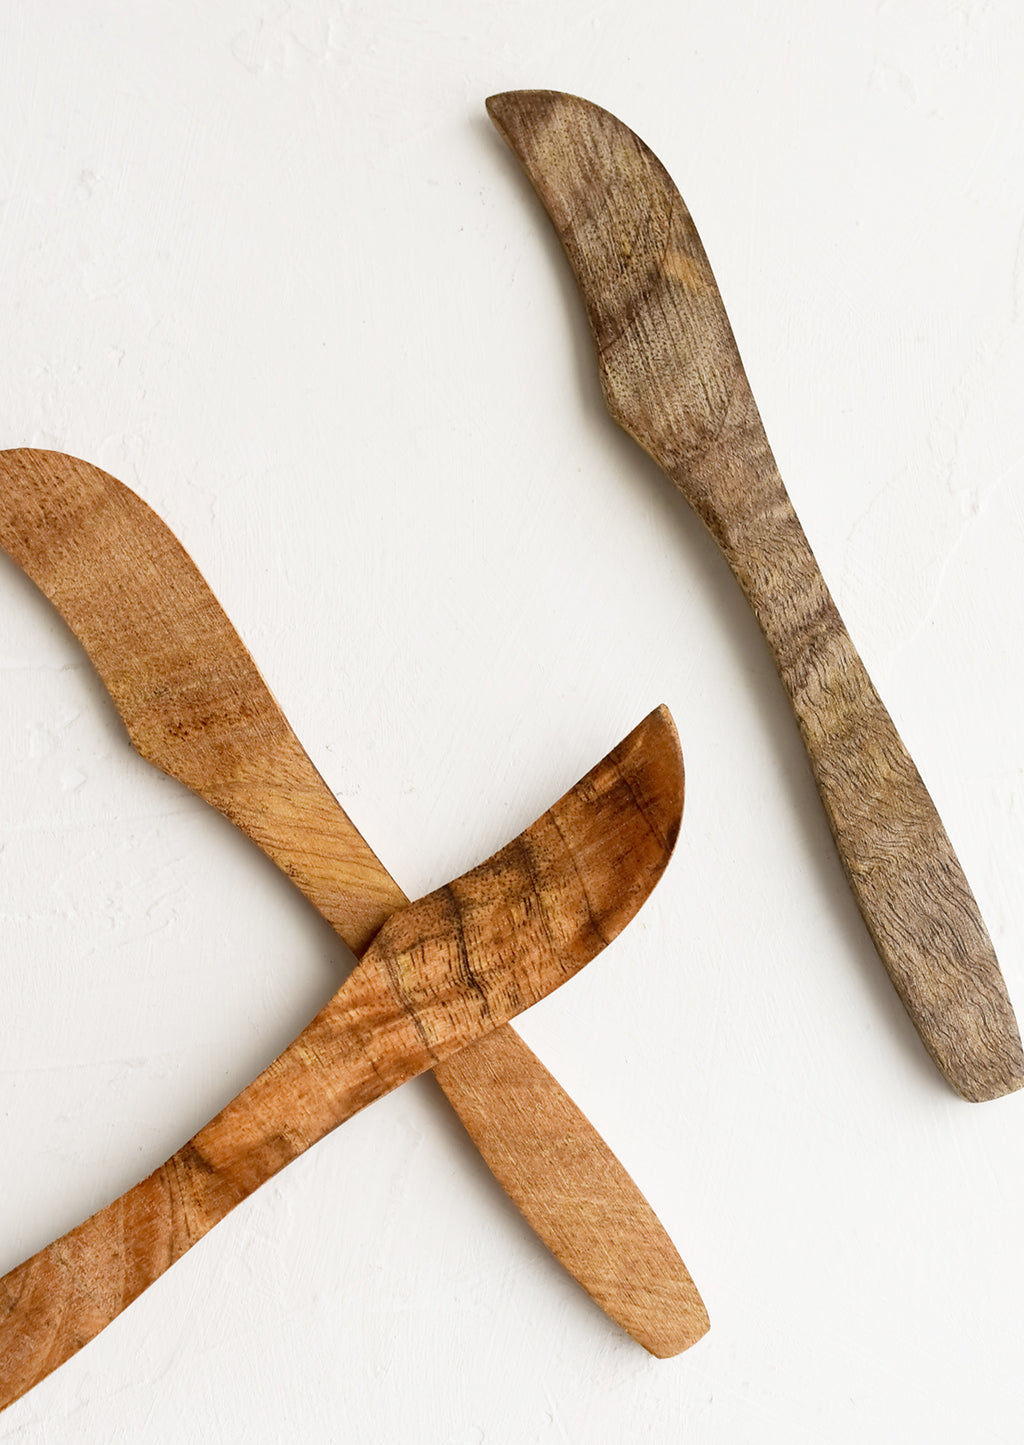 3: Wooden butter knives showing slightly varied wood colors.